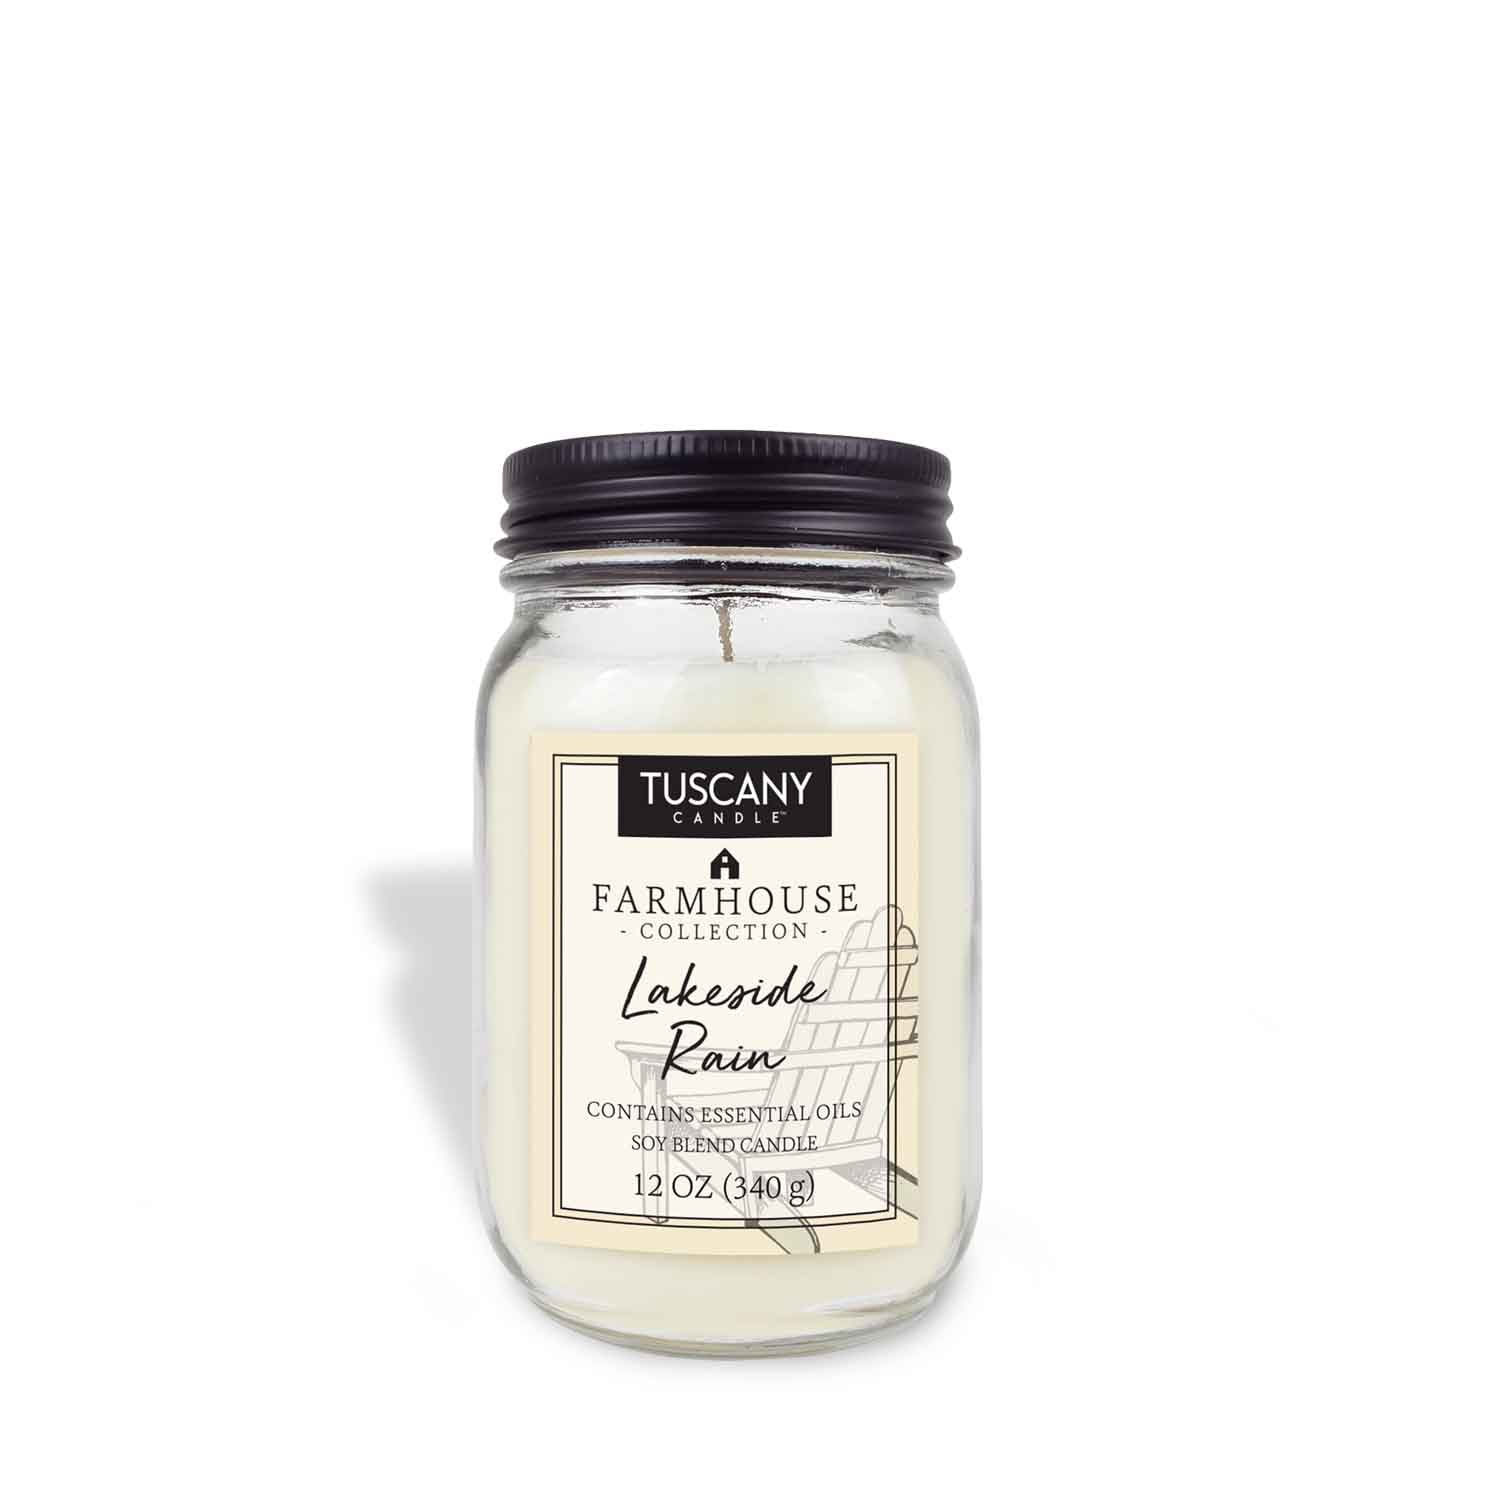 A Lakeside Rain Scented Jar Candle (12 oz) from the Farmhouse Collection by Tuscany Candle® EVD.